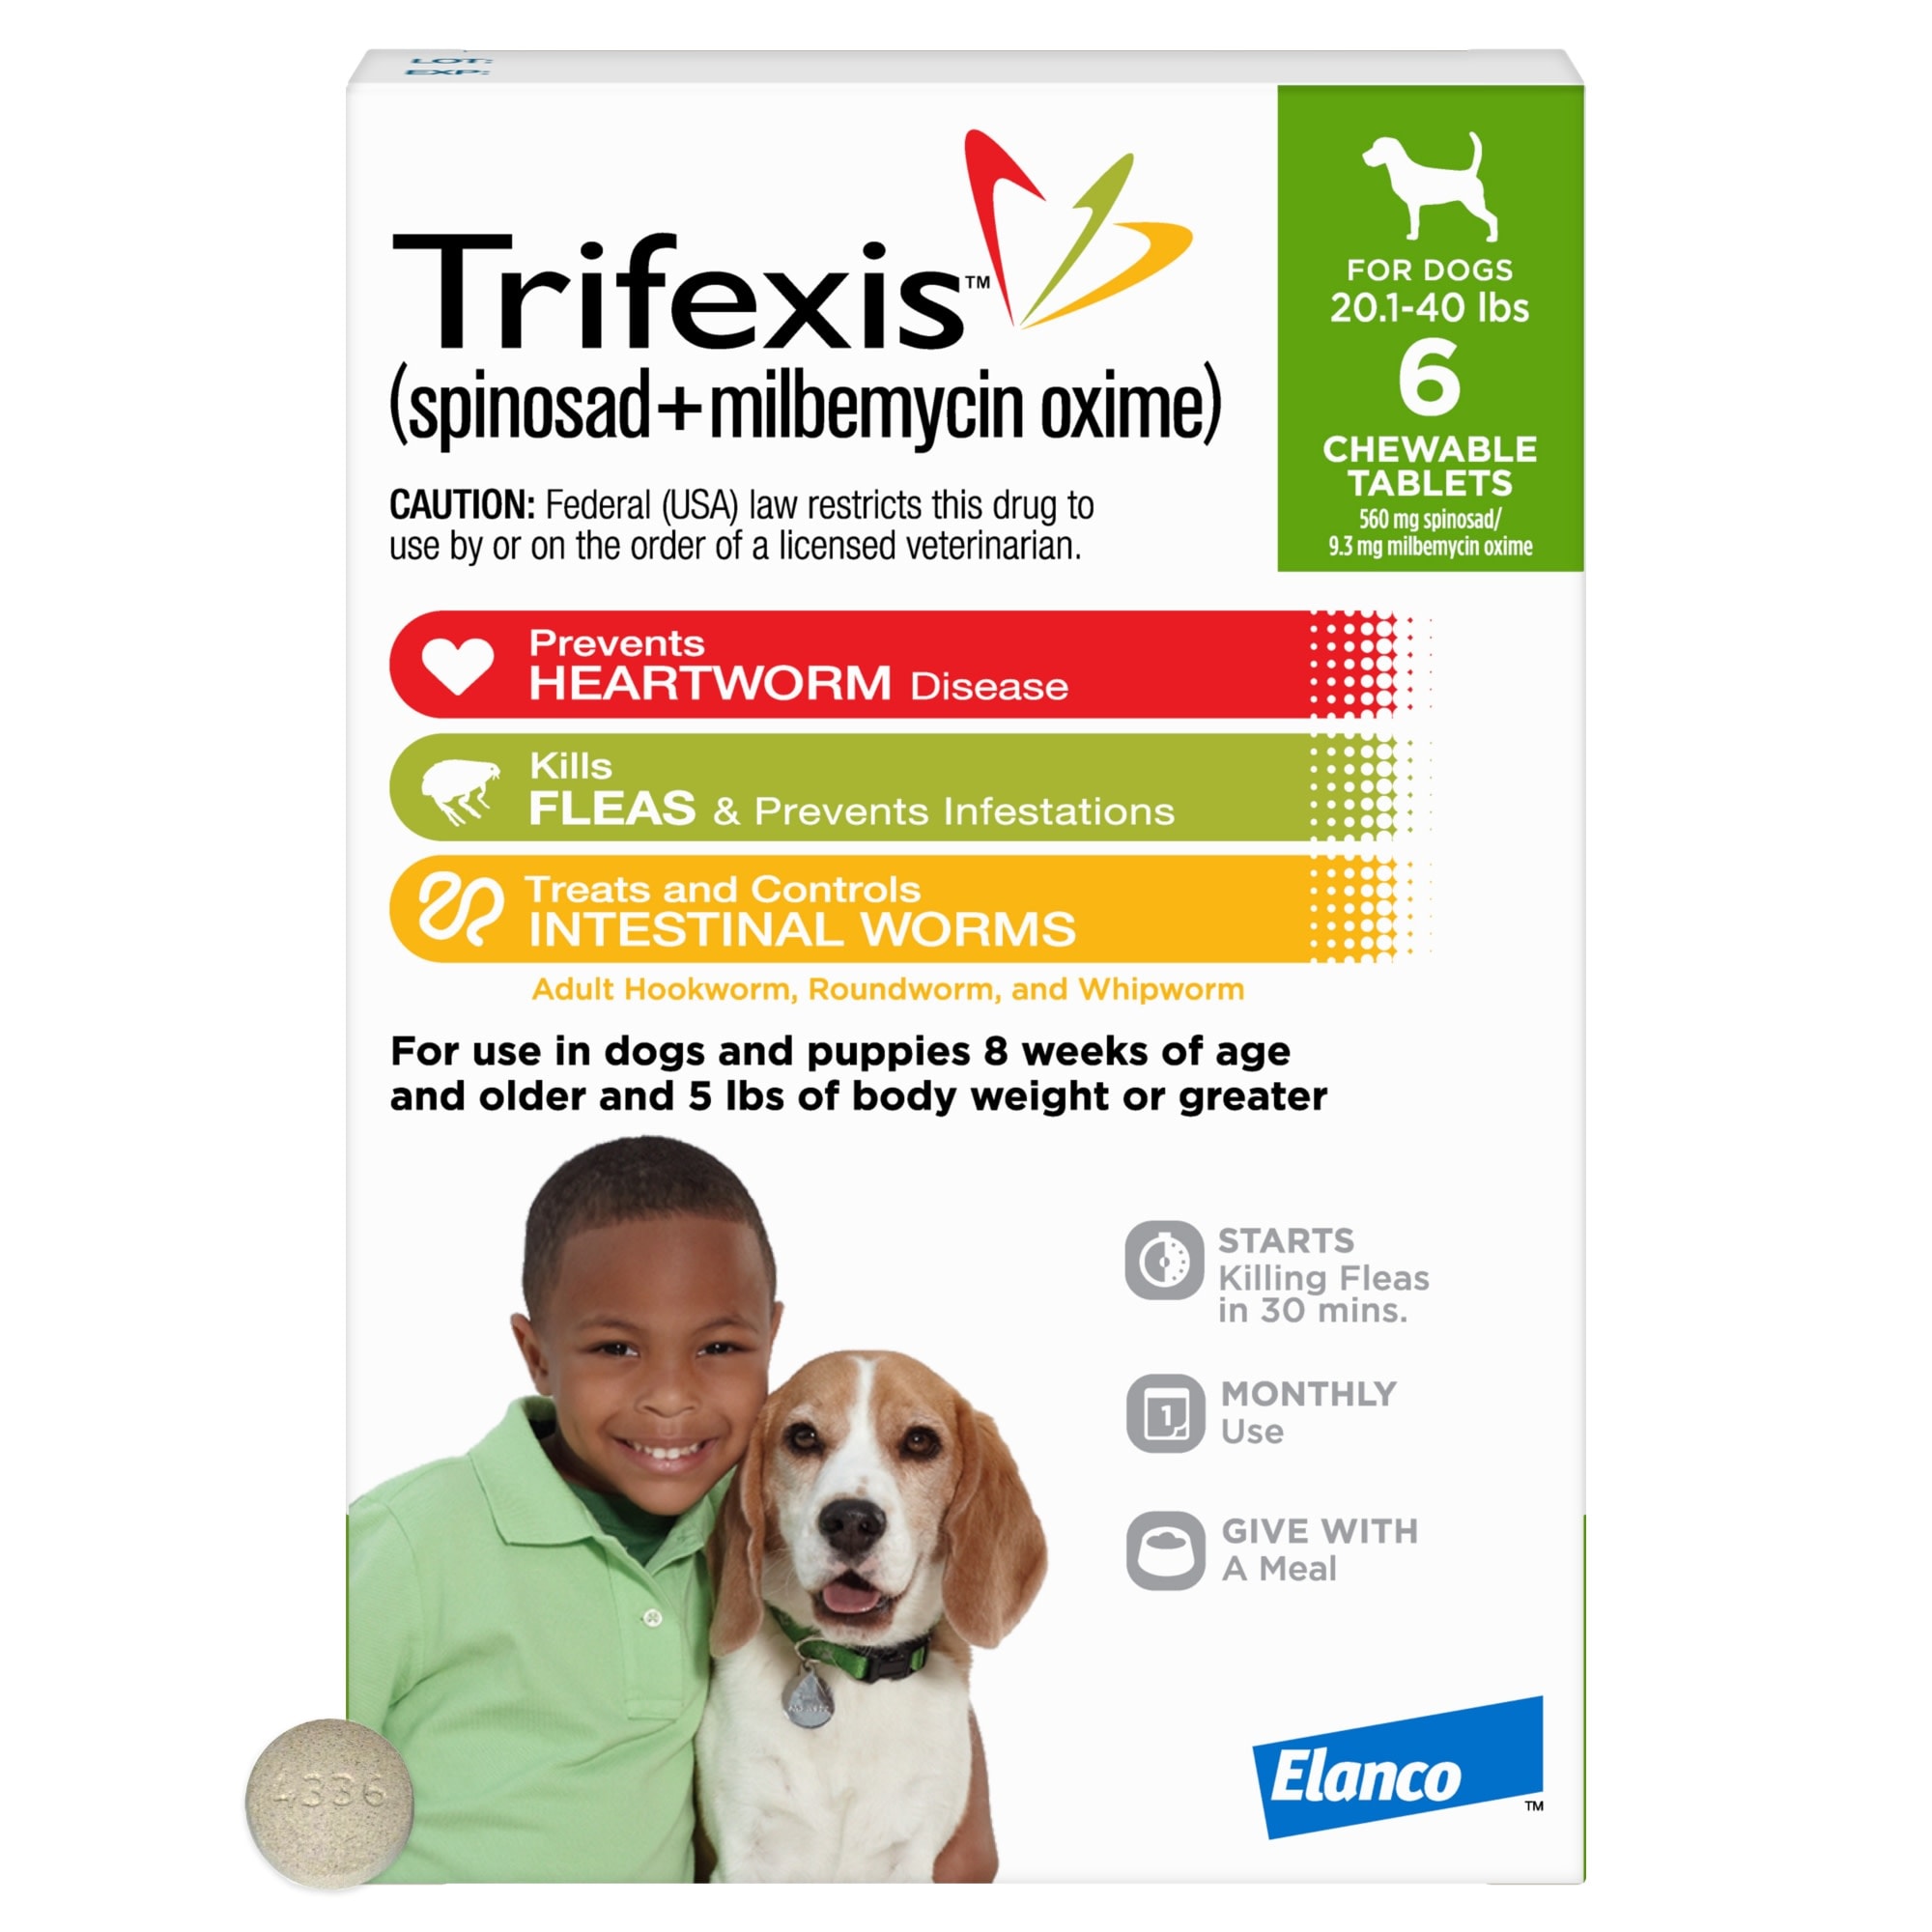 my dog is on trifexis and still has fleas